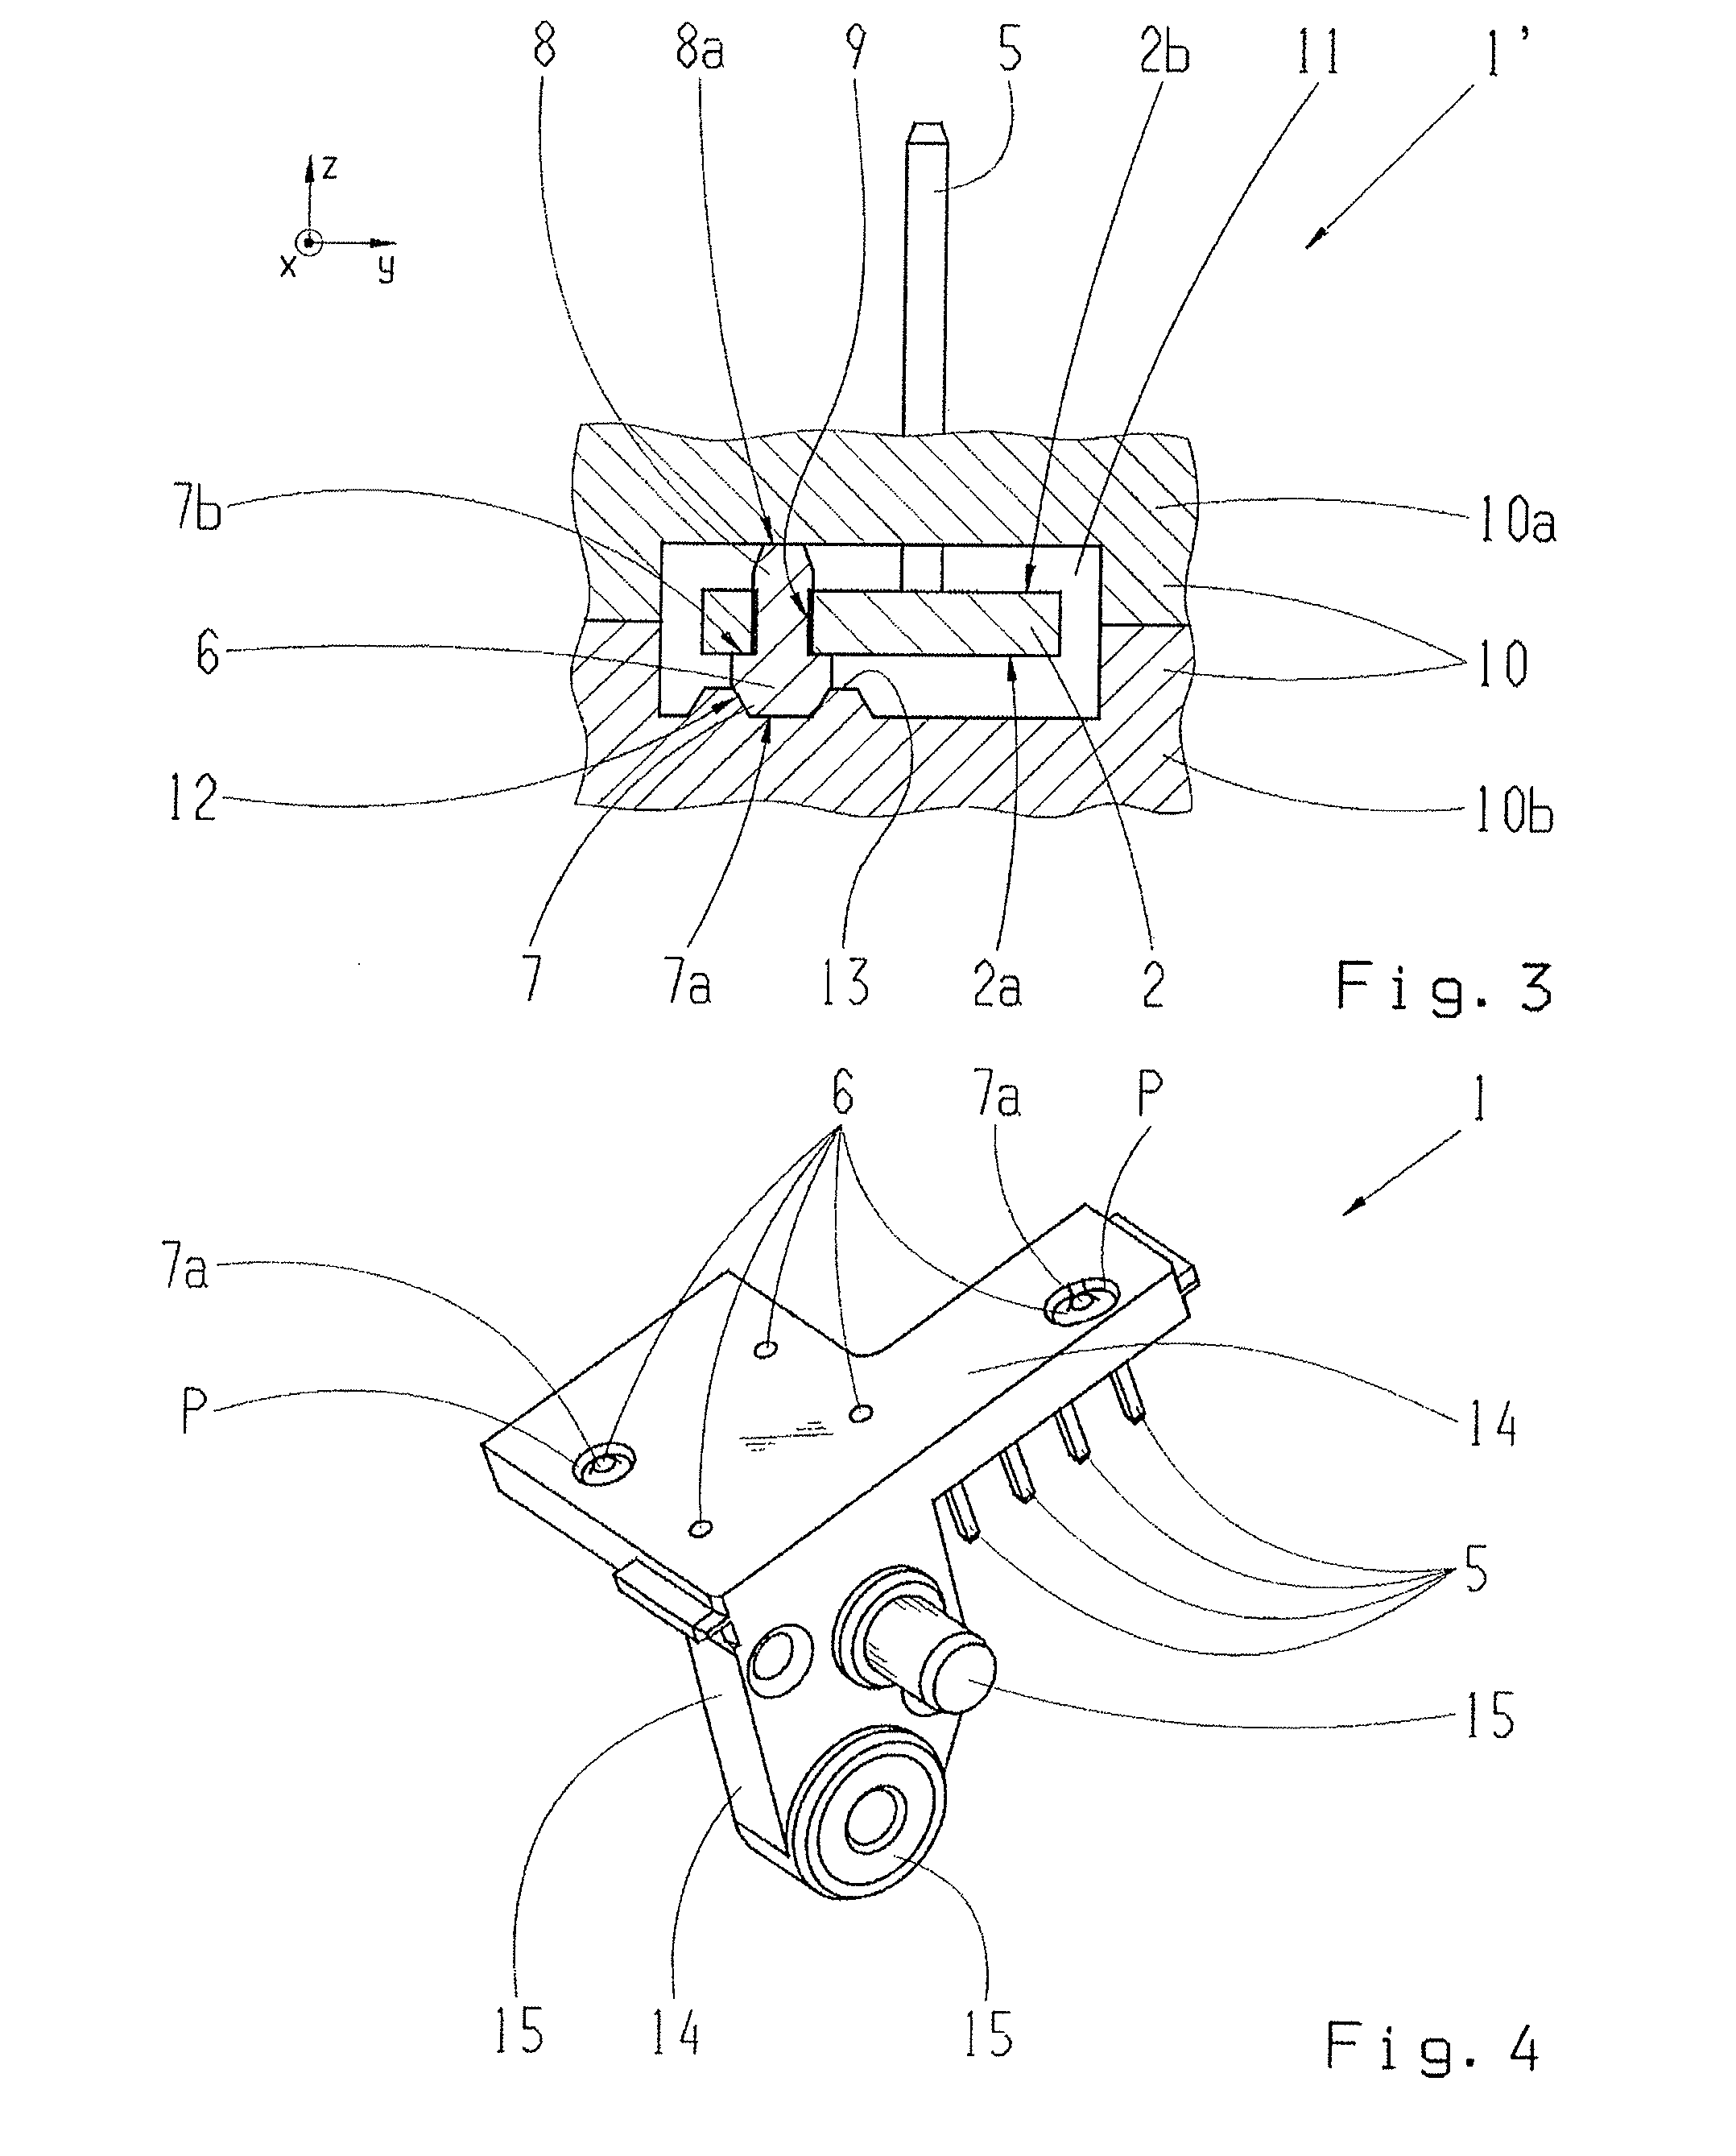 Method of manufacturing a molded sensor subassembly